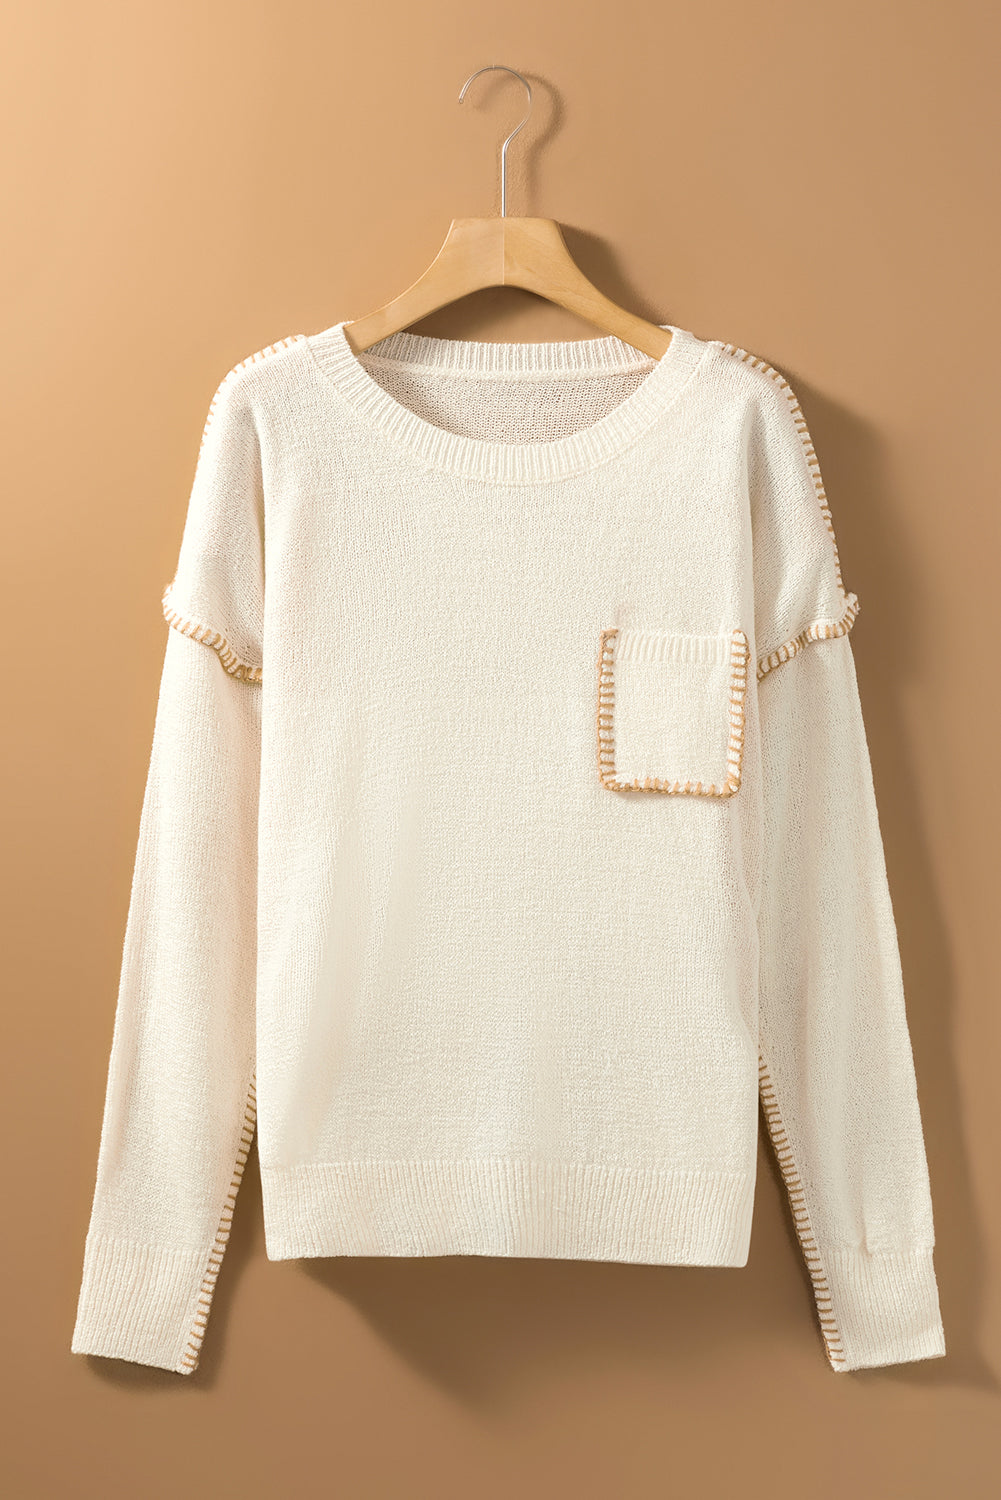 Beige Exposed Stitching Chest Pocket Drop Shoulder Sweater